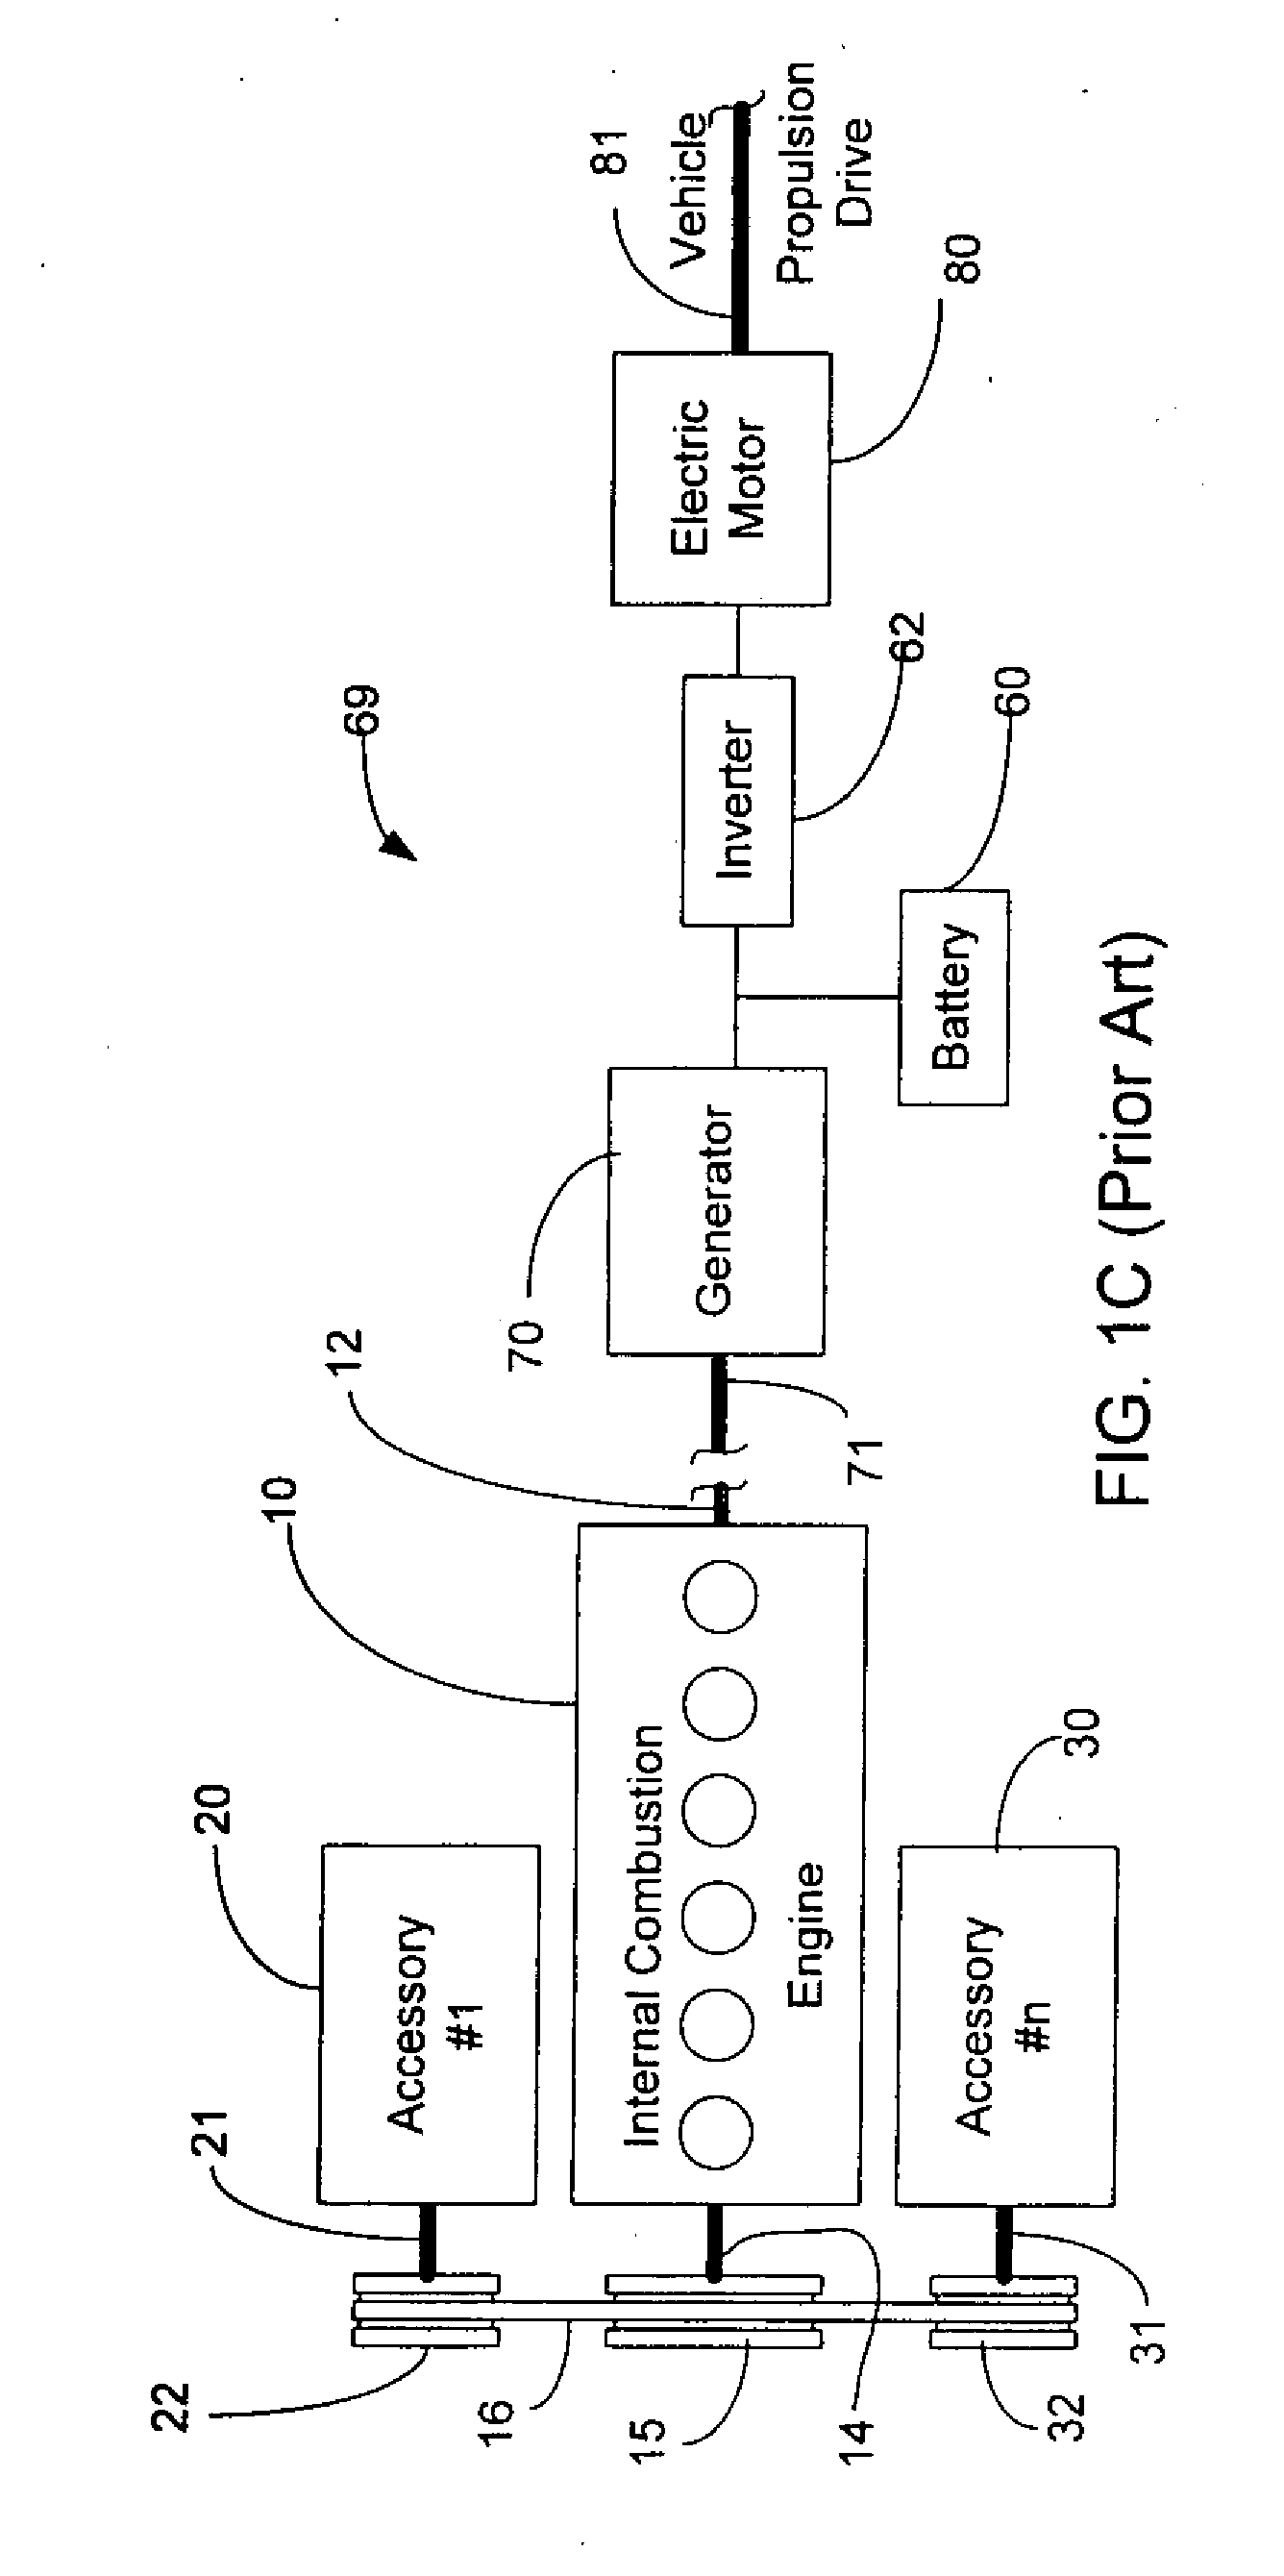 System and Method for Powering Accessories in a Hybrid Vehicle